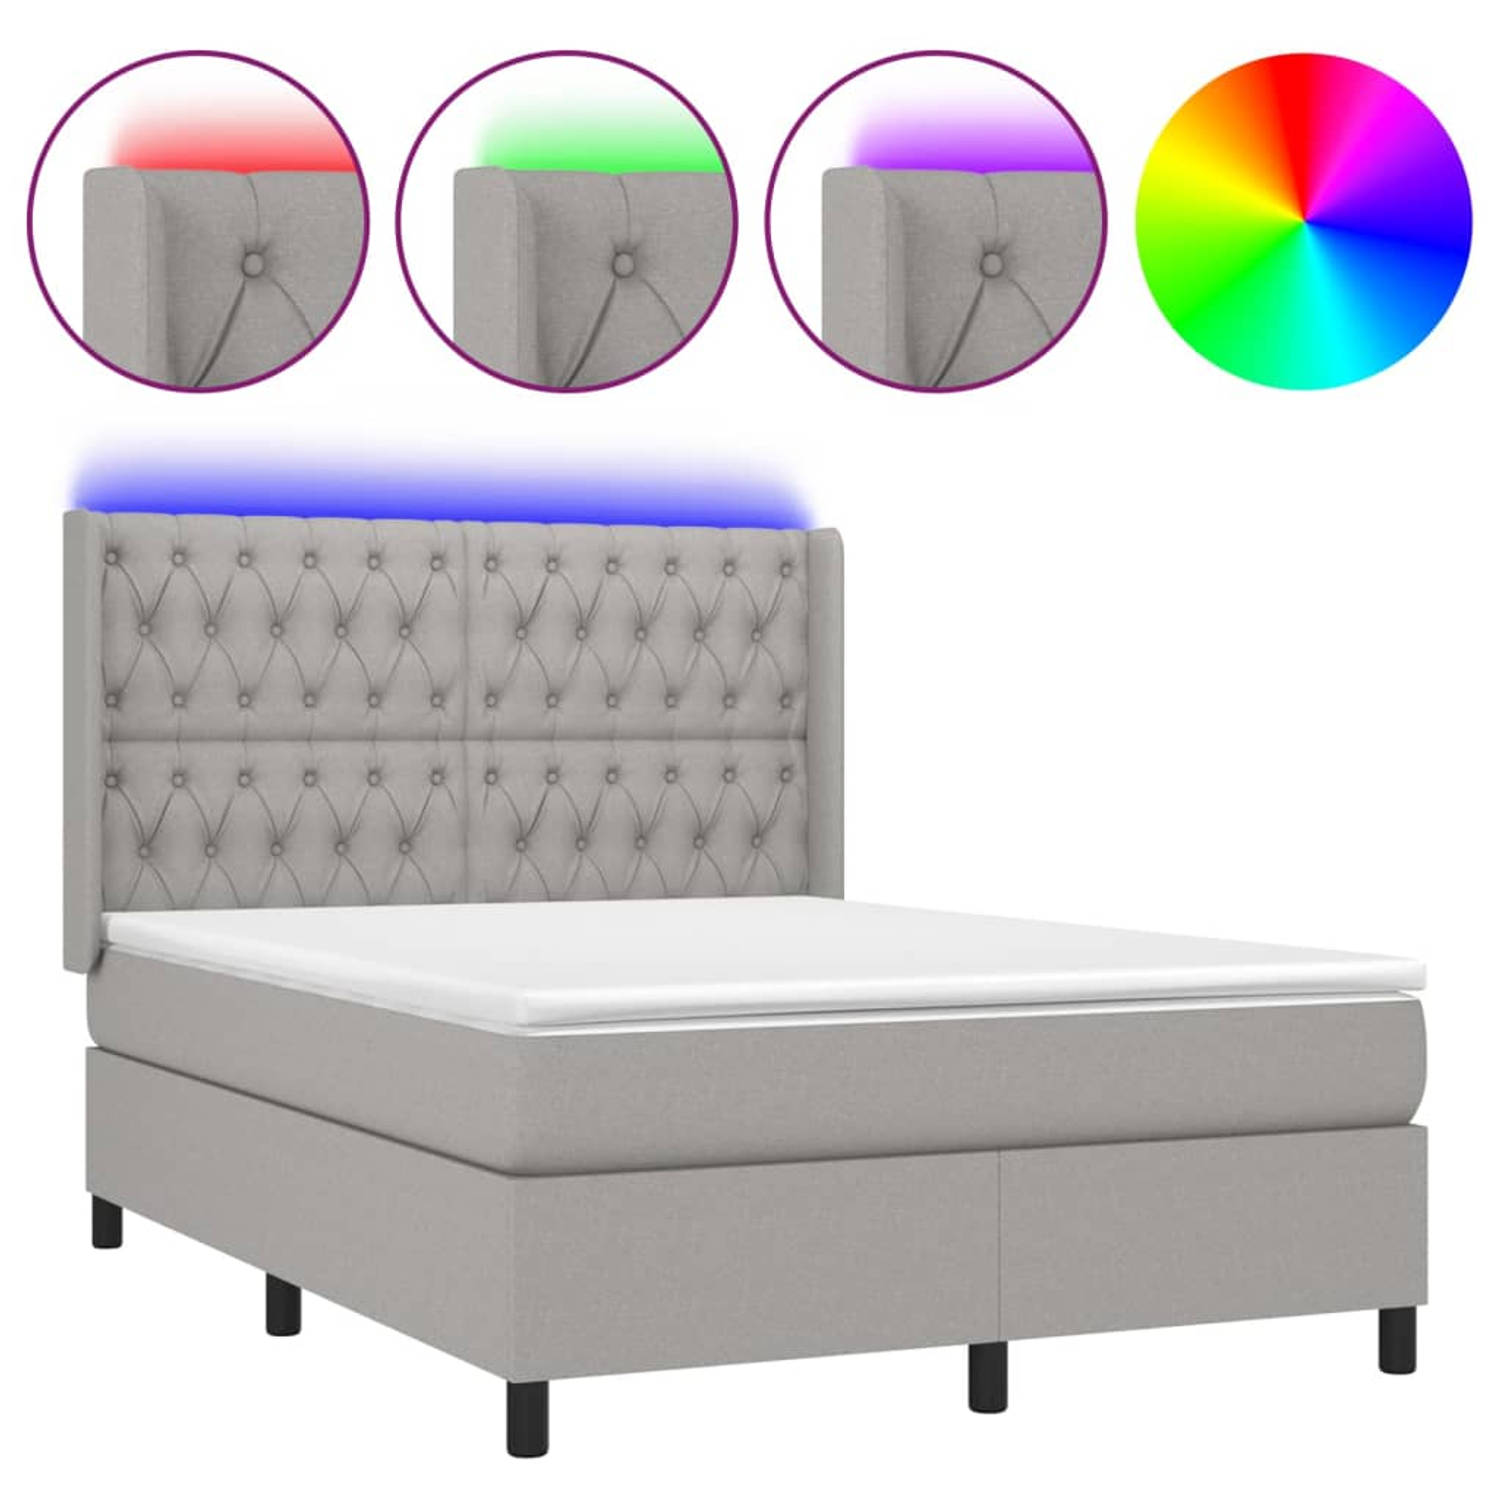 The Living Store Boxspring met matras en LED stof lichtgrijs 140x200 cm - Boxspring - Boxsprings - Bed - Slaapmeubel - Boxspringbed - Boxspring Bed - Tweepersoonsbed - Bed Met Matr